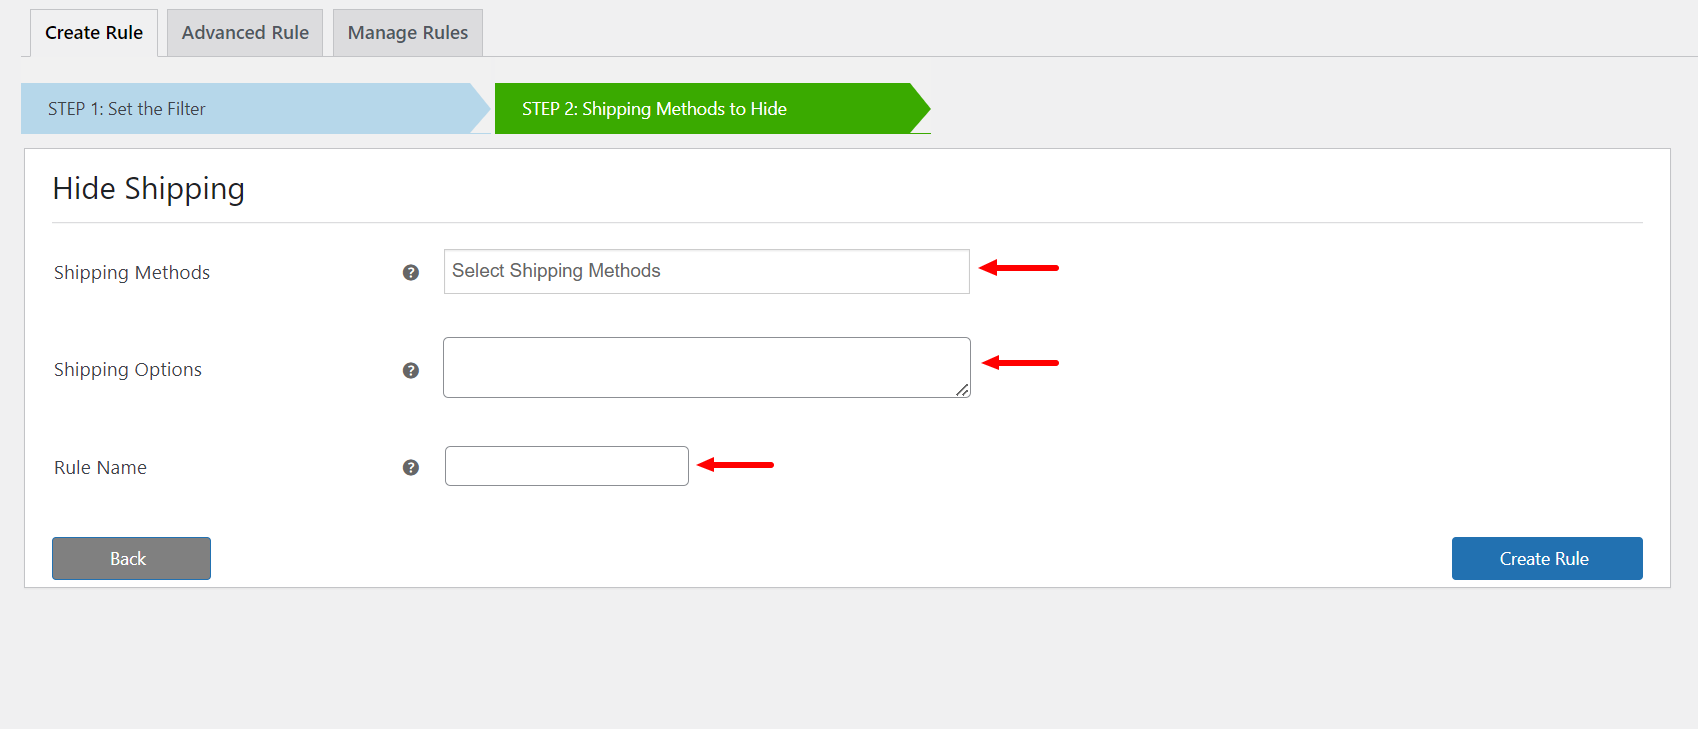 Selecting Shipping Methods for Hiding